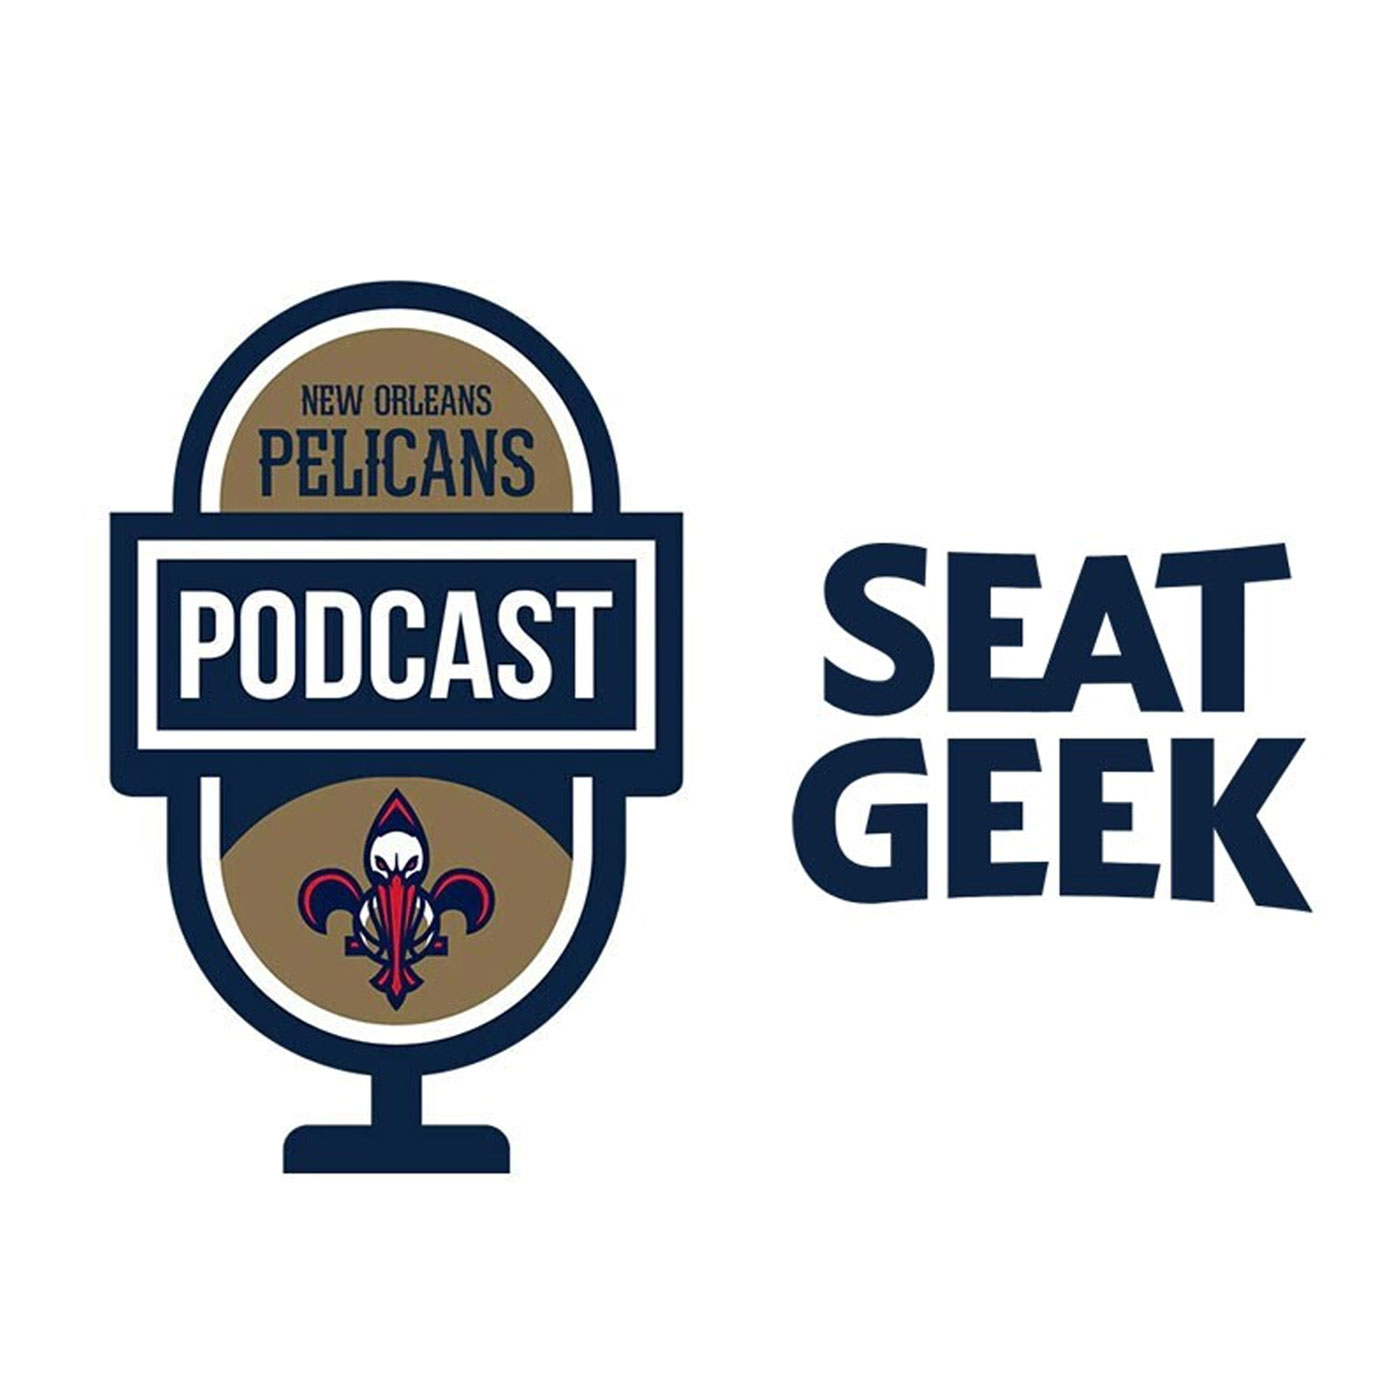 Will Guillory on the New Orleans Pelicans Podcast presented by SeatGeek - November 8, 2021